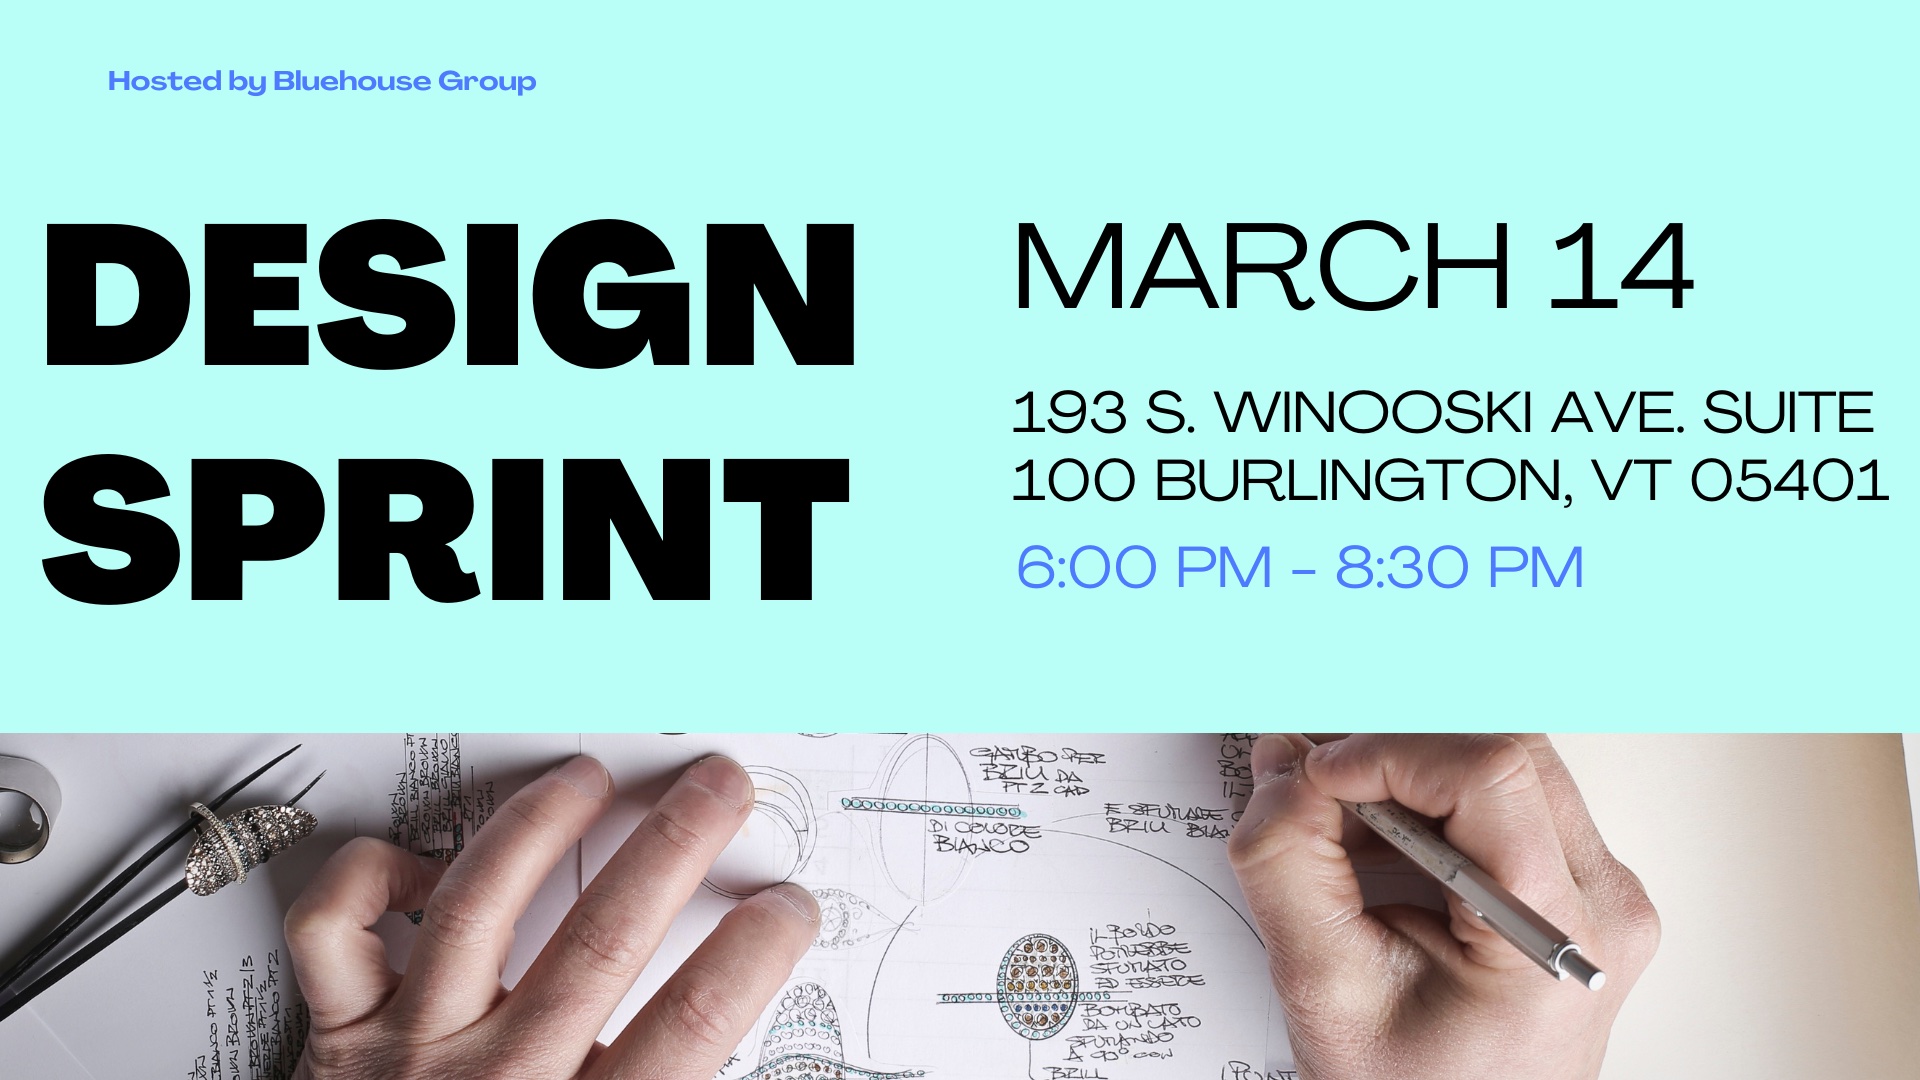 A cover image for an event. The left side of the image reads “DESIGN SPRINT” in large bold text with “Hosted by Bluehouse Group” above it. On the right side of the image reads “March 14th” with Bluehouse Group’s address underneath “193. South Winooski Ave. Suite 100 Burlington, VT 05401” with the time 6:00 PM - 8 PM.